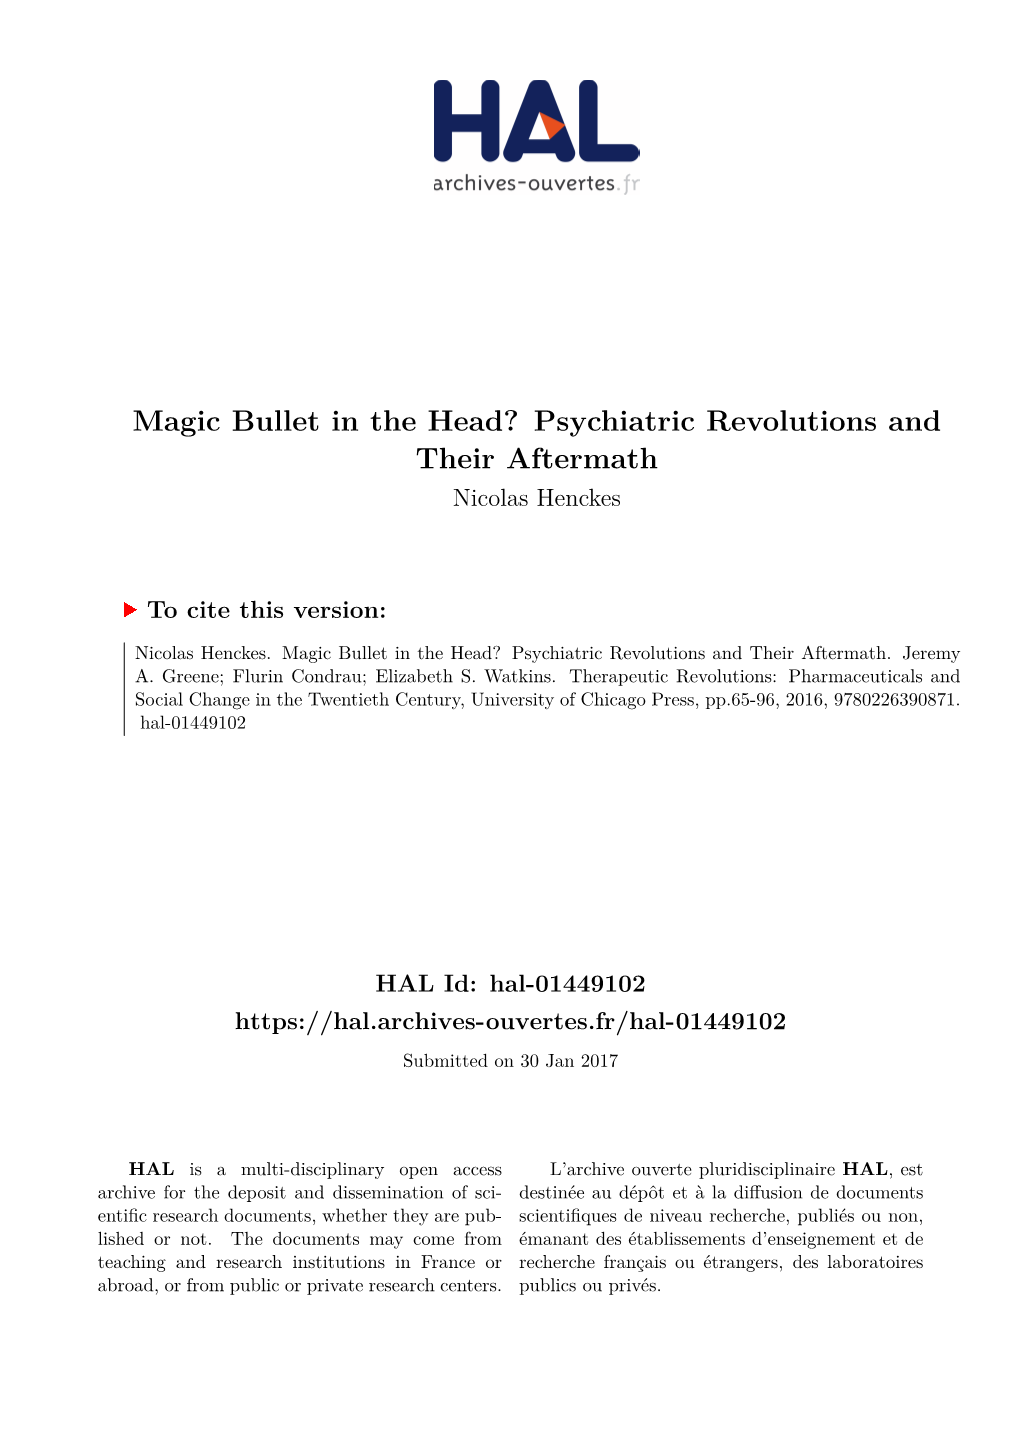 Magic Bullet in the Head? Psychiatric Revolutions and Their Aftermath Nicolas Henckes